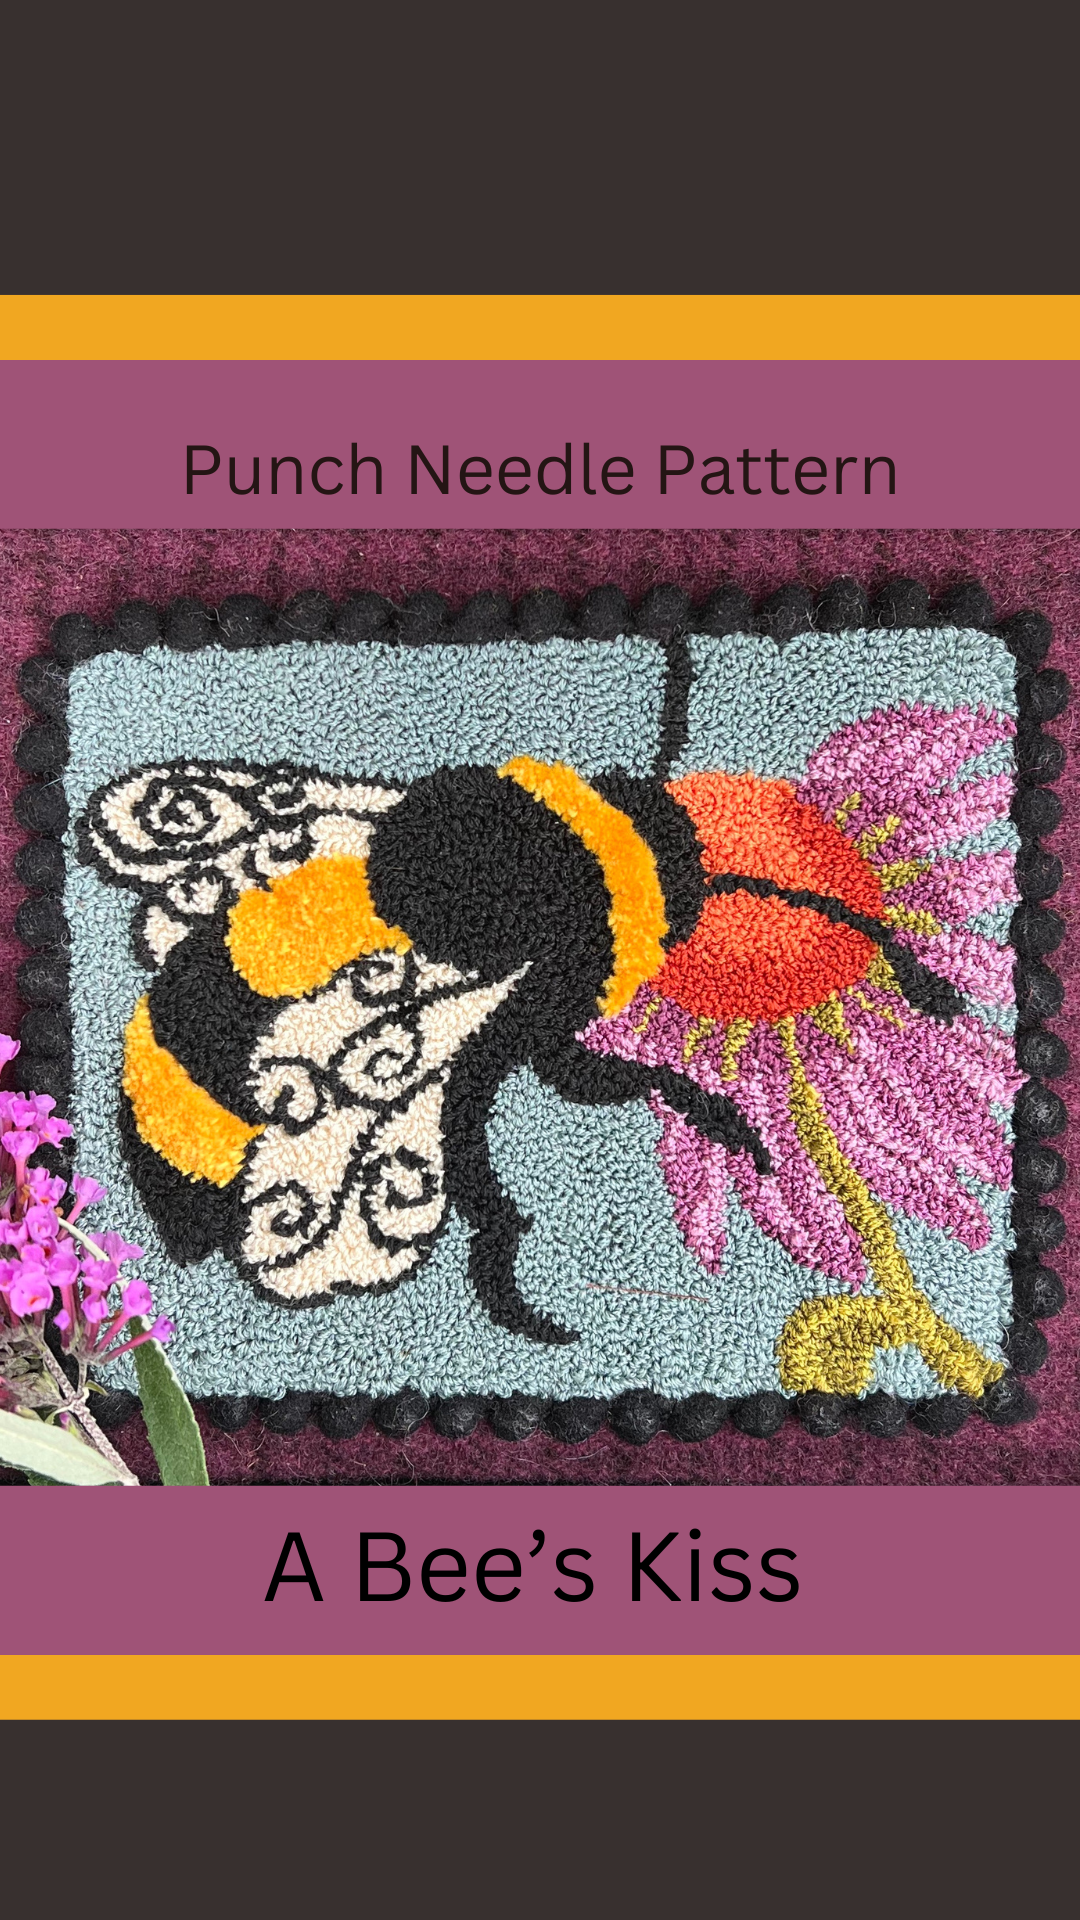 A Bee's Kiss- Punch Needle Pattern